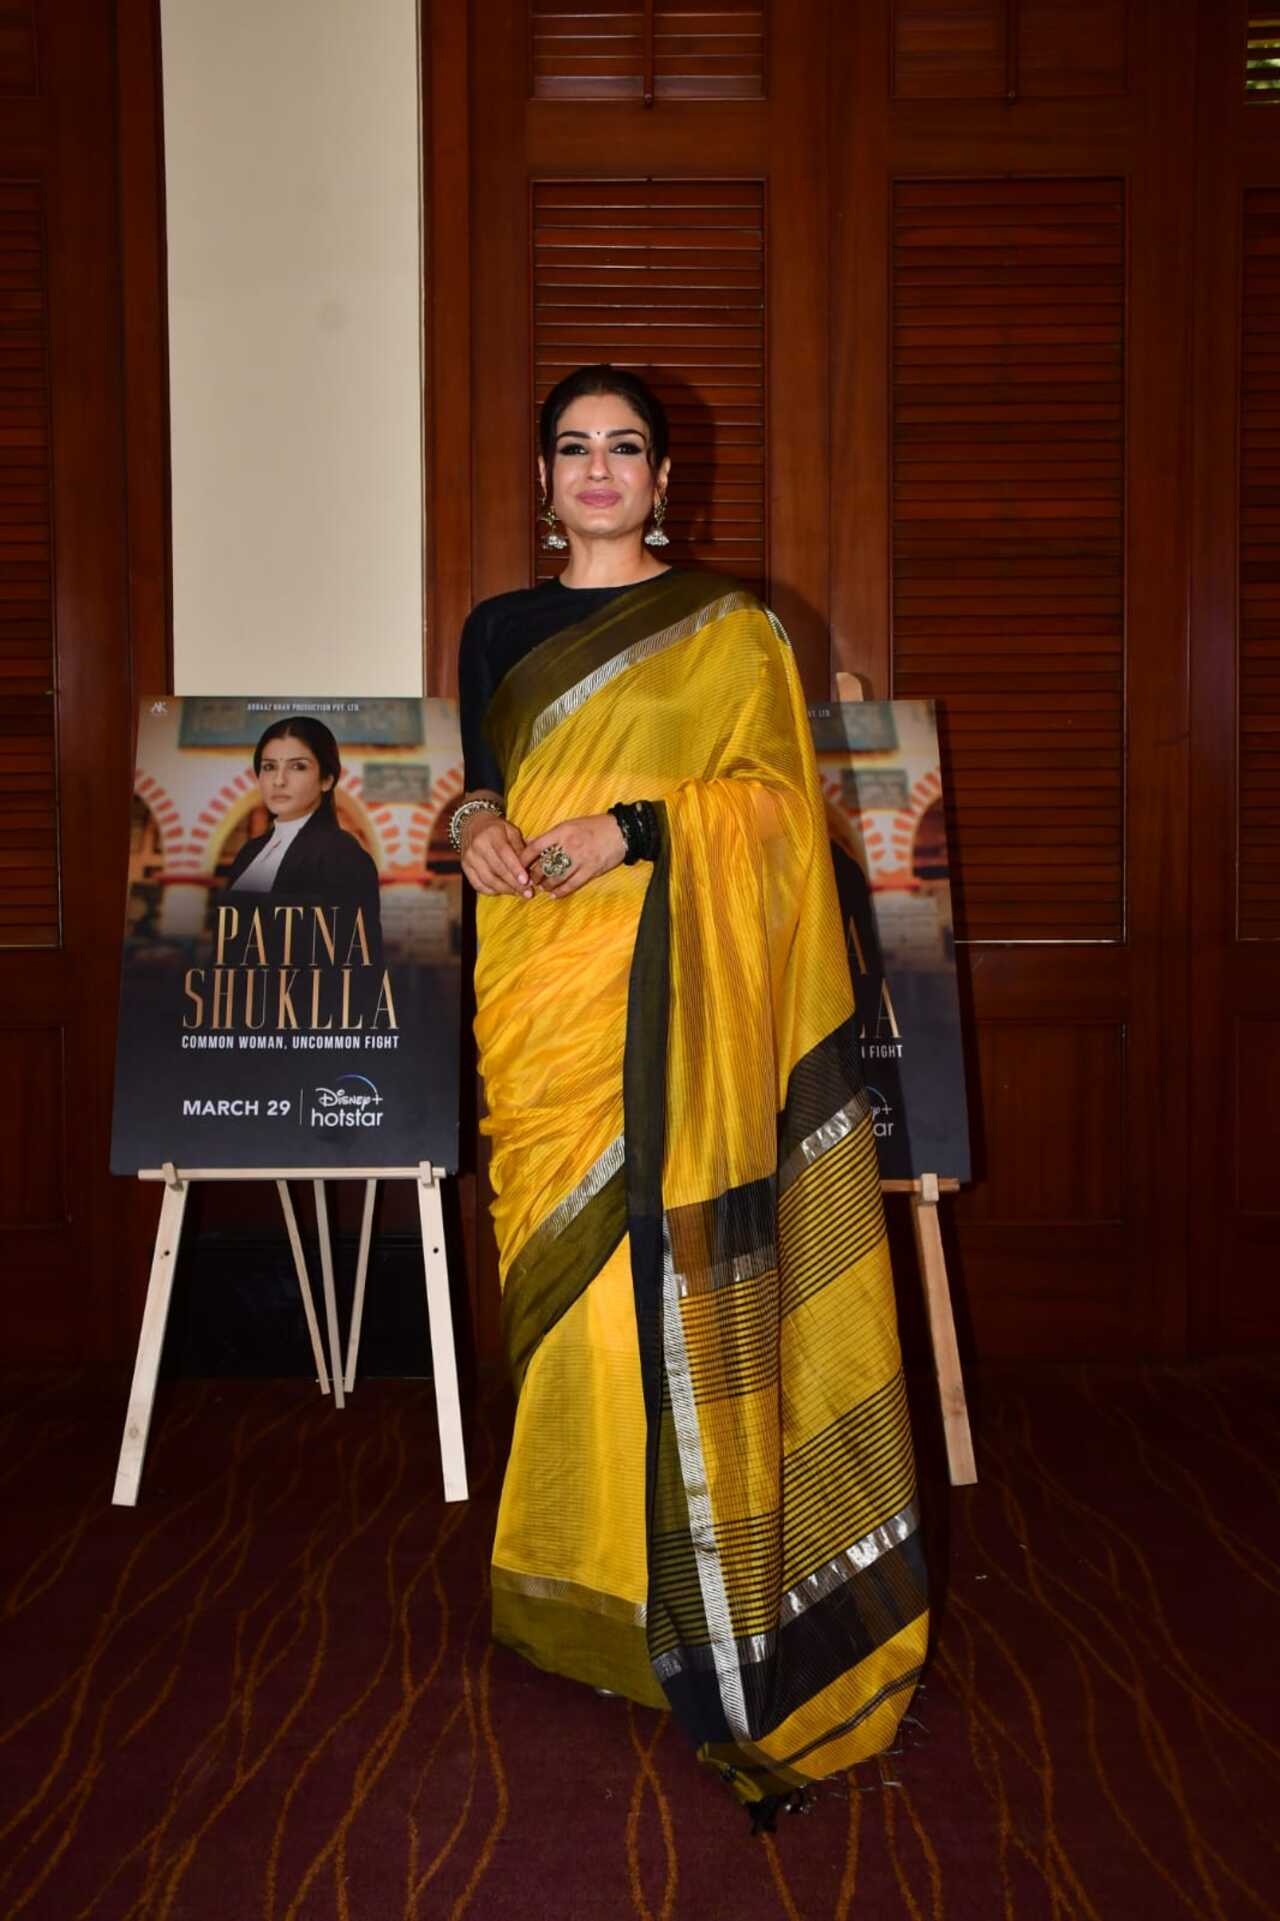 Raveena Tandon stunned in a yellow saree for the premiere of her film 'Patna Shukla'